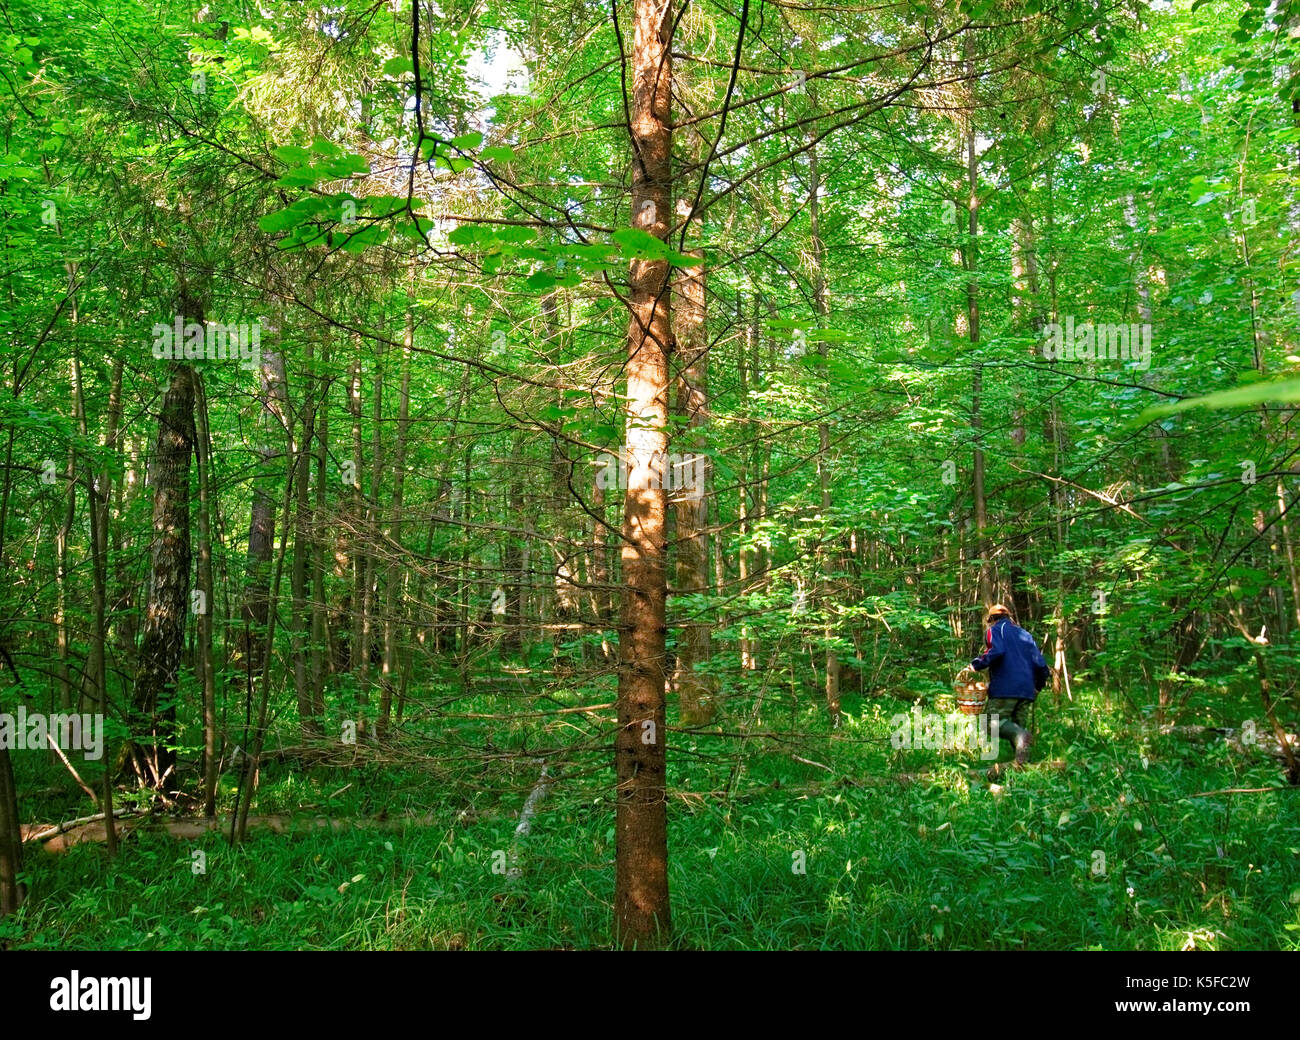 mushroom pickers collect mushrooms in the Russian forest, Tula oblast Stock Photo